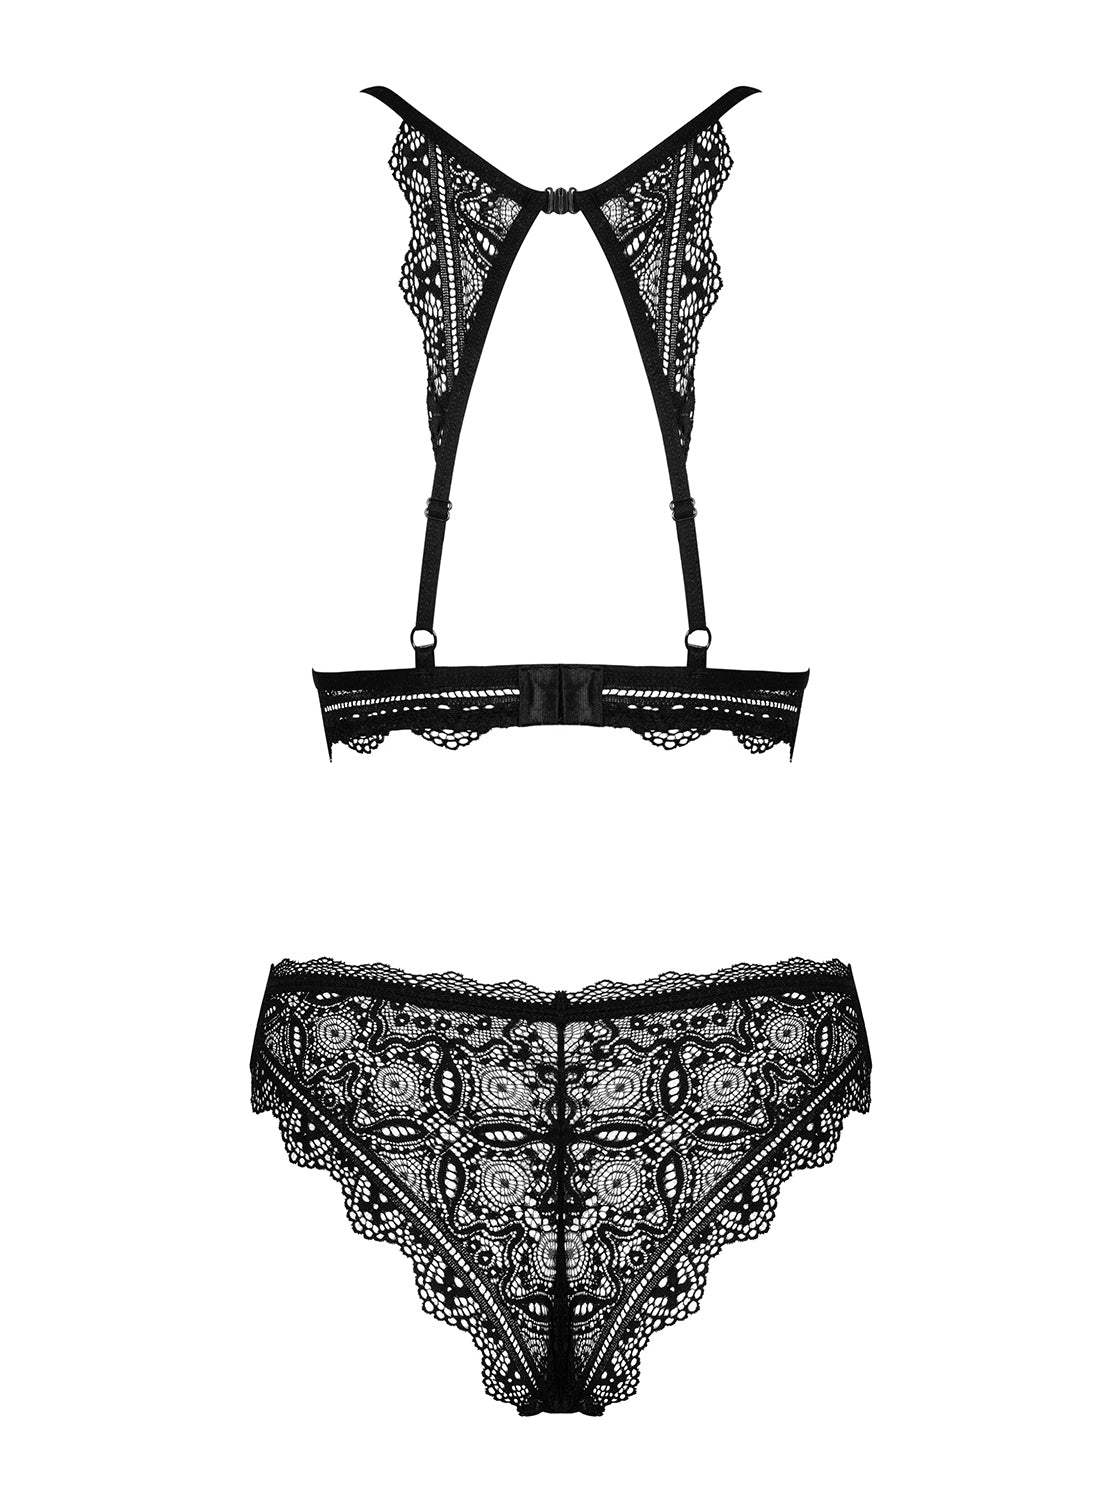 Renelia a black lace set with a touch of boho and a bra with padded cups